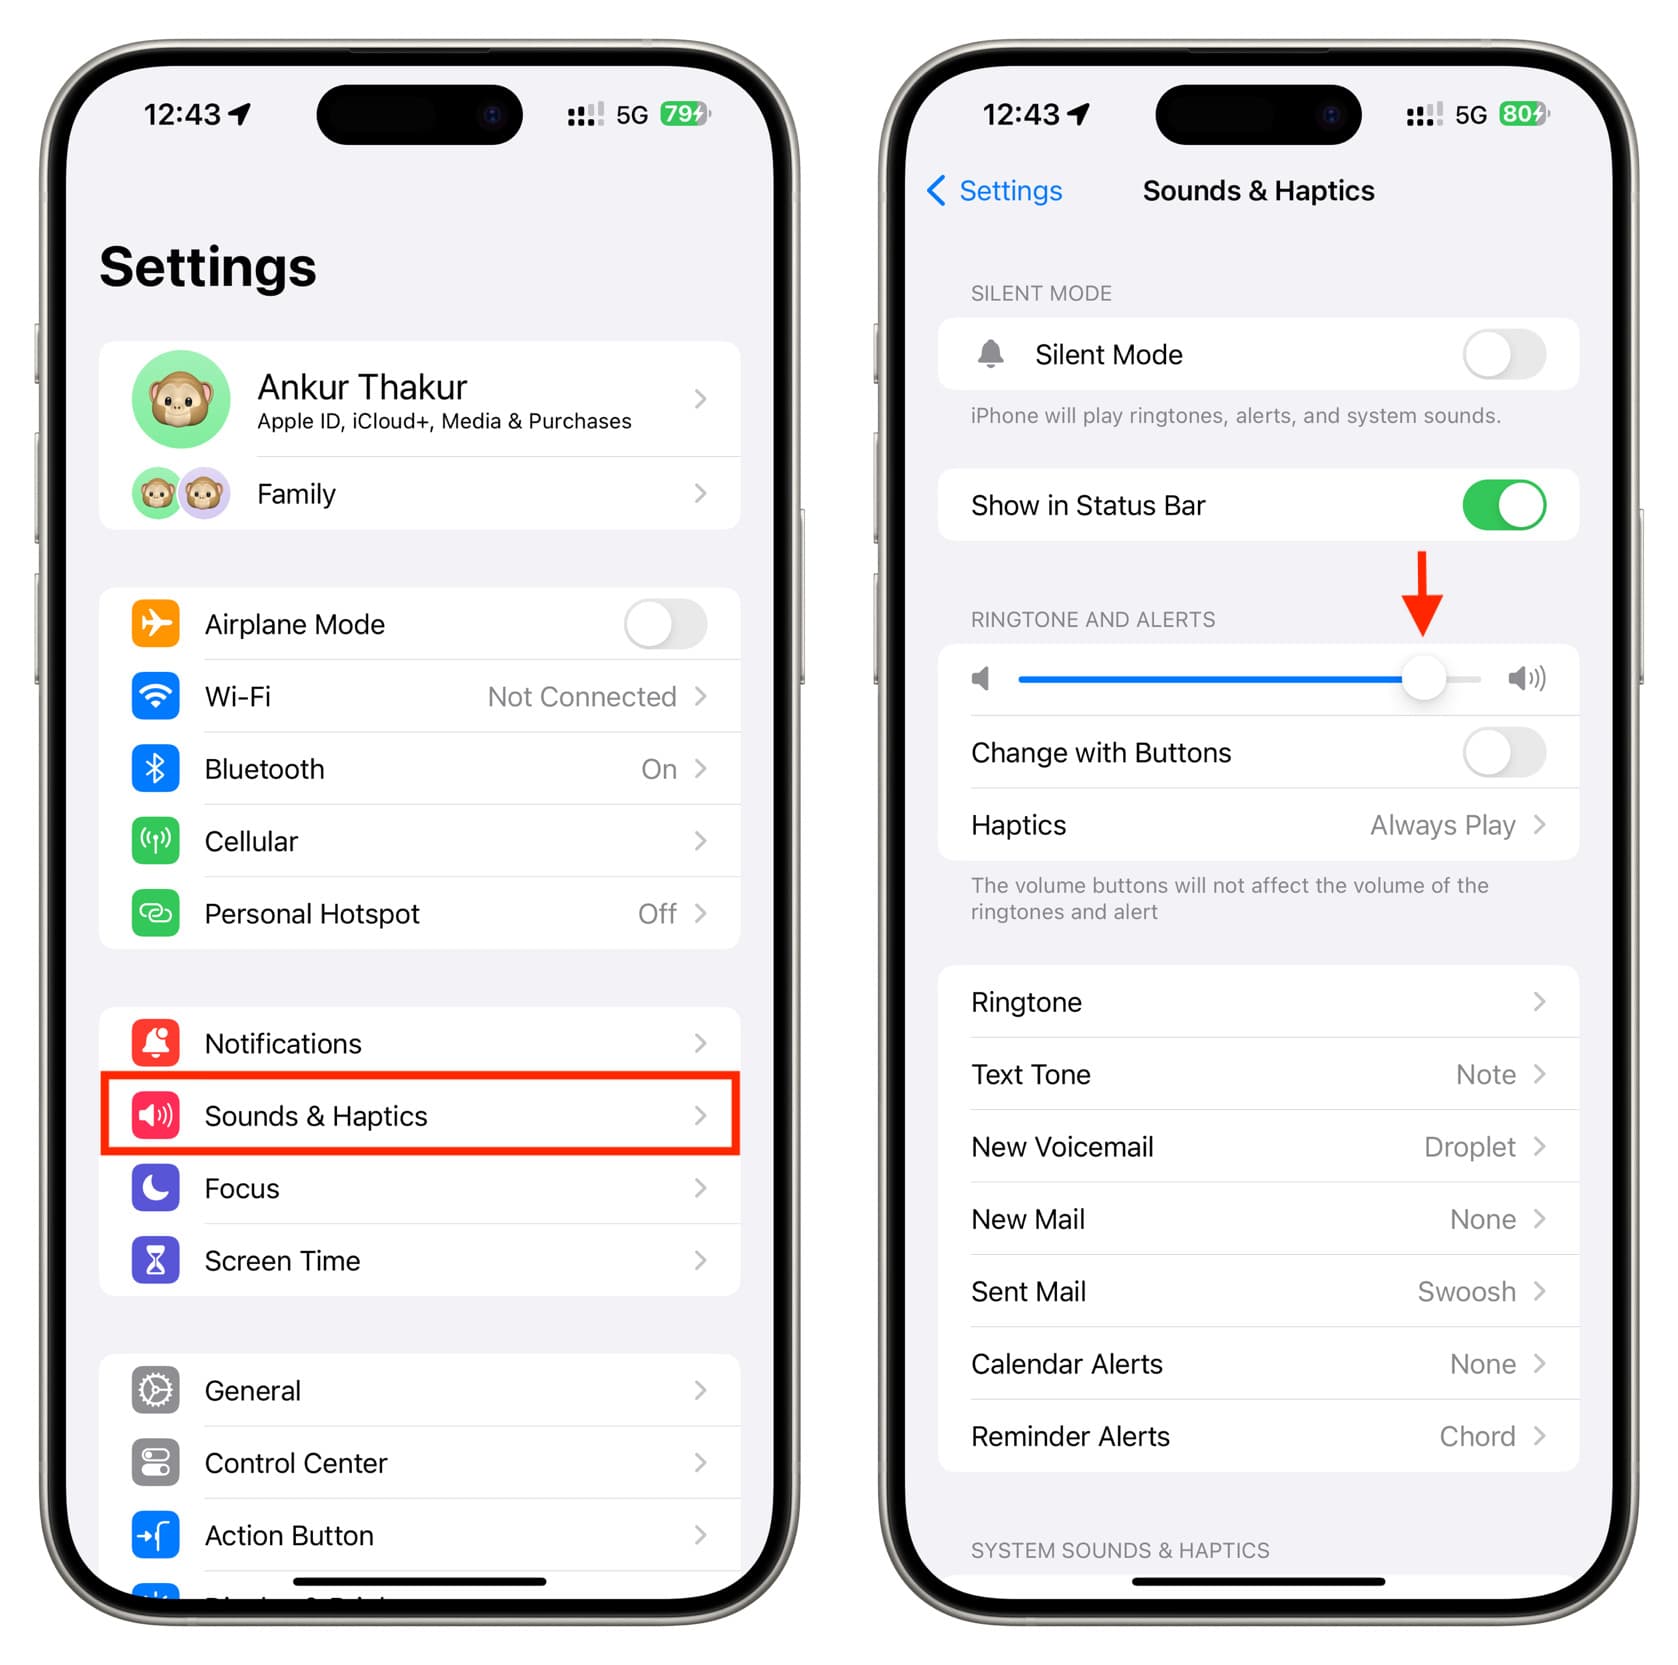 Sounds and Haptics settings on iPhone